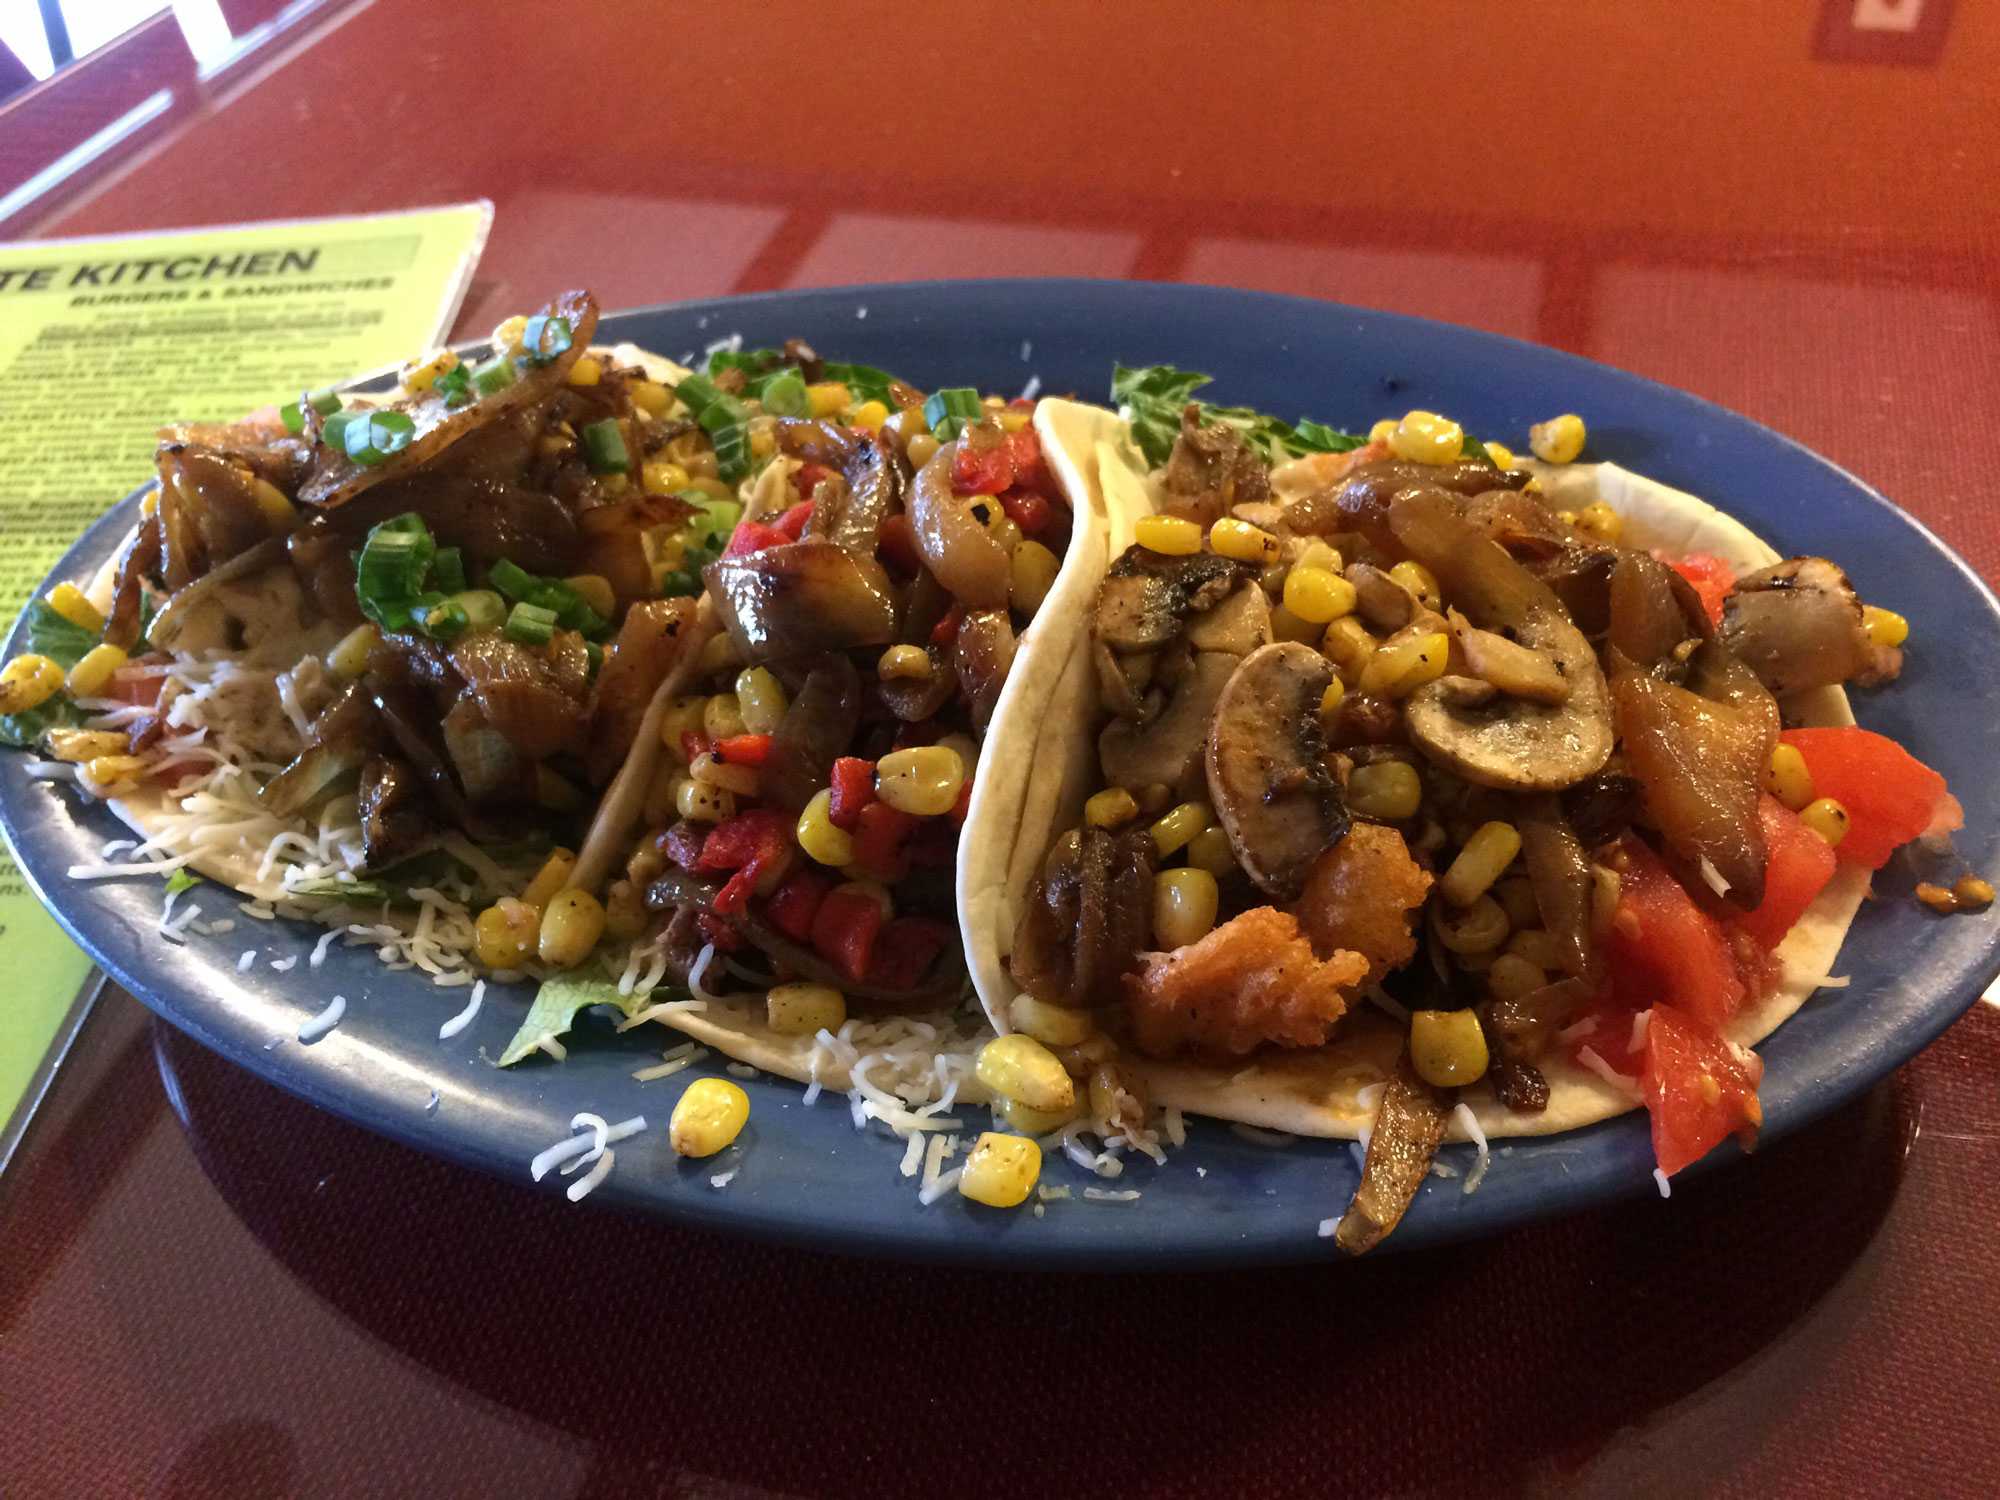 From left to right: Coyote Kitchen's jerk chicken, kobe beef and fried shrimp tacos. Coyote Kitchen offers six different tacos.